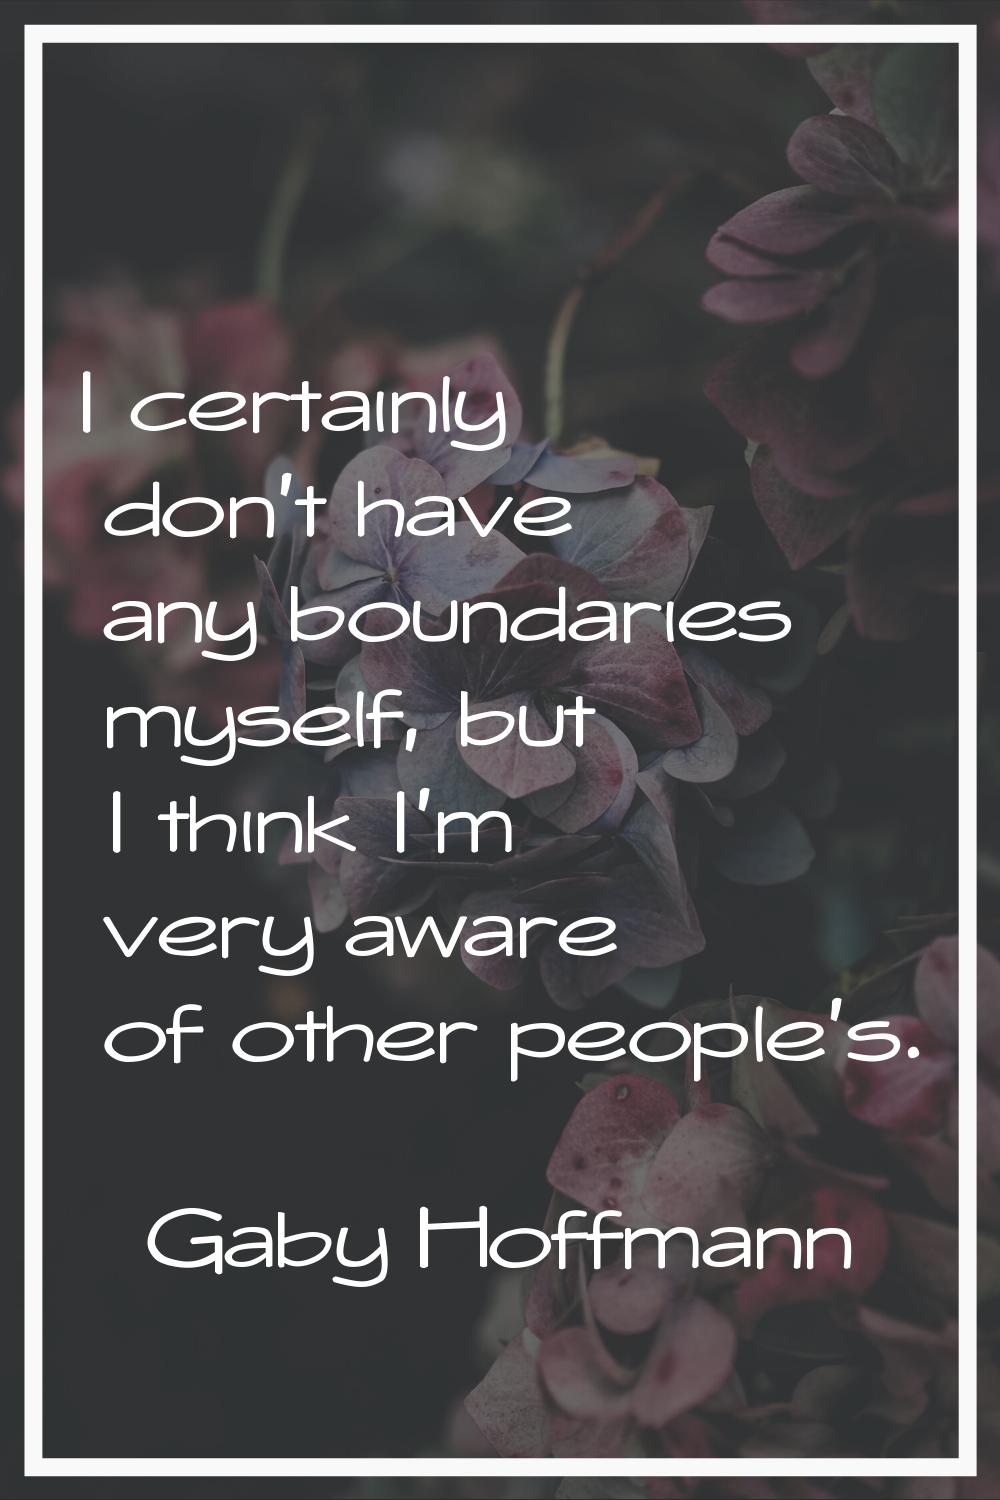 I certainly don't have any boundaries myself, but I think I'm very aware of other people's.